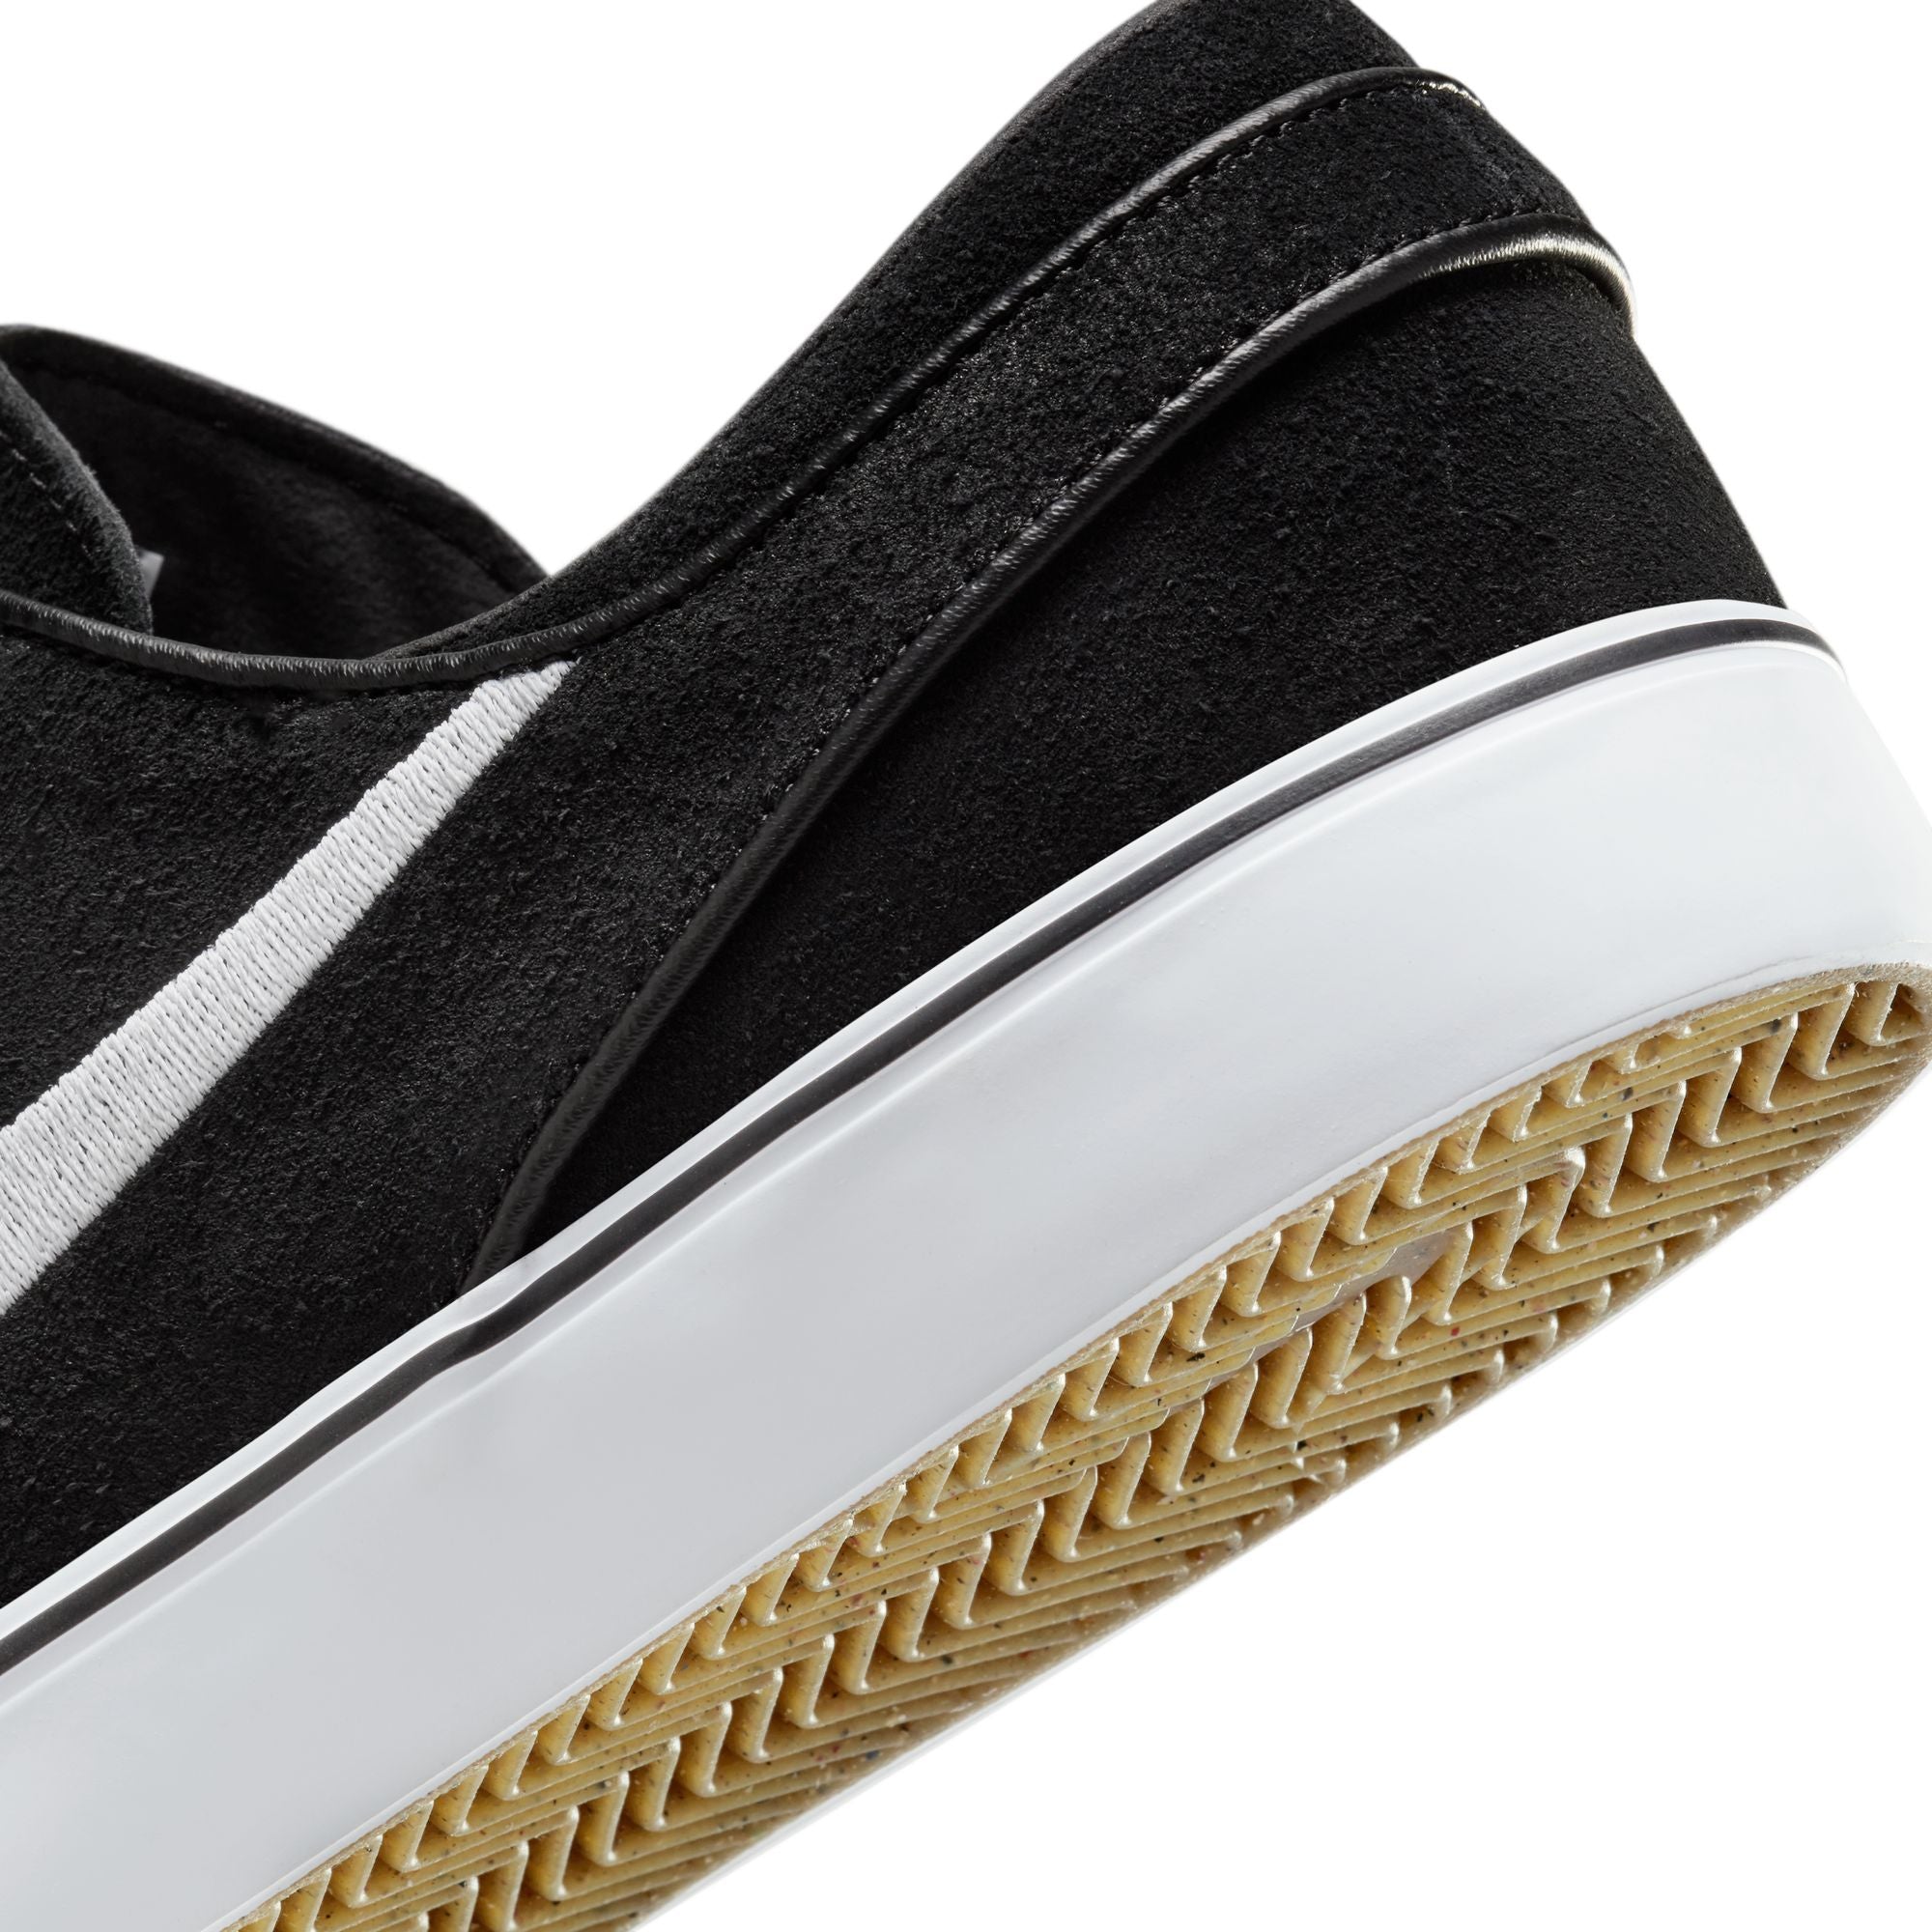 Low top Nike SB janoski skate shoes, in black and white colourway with white nike swoosh on sides. 